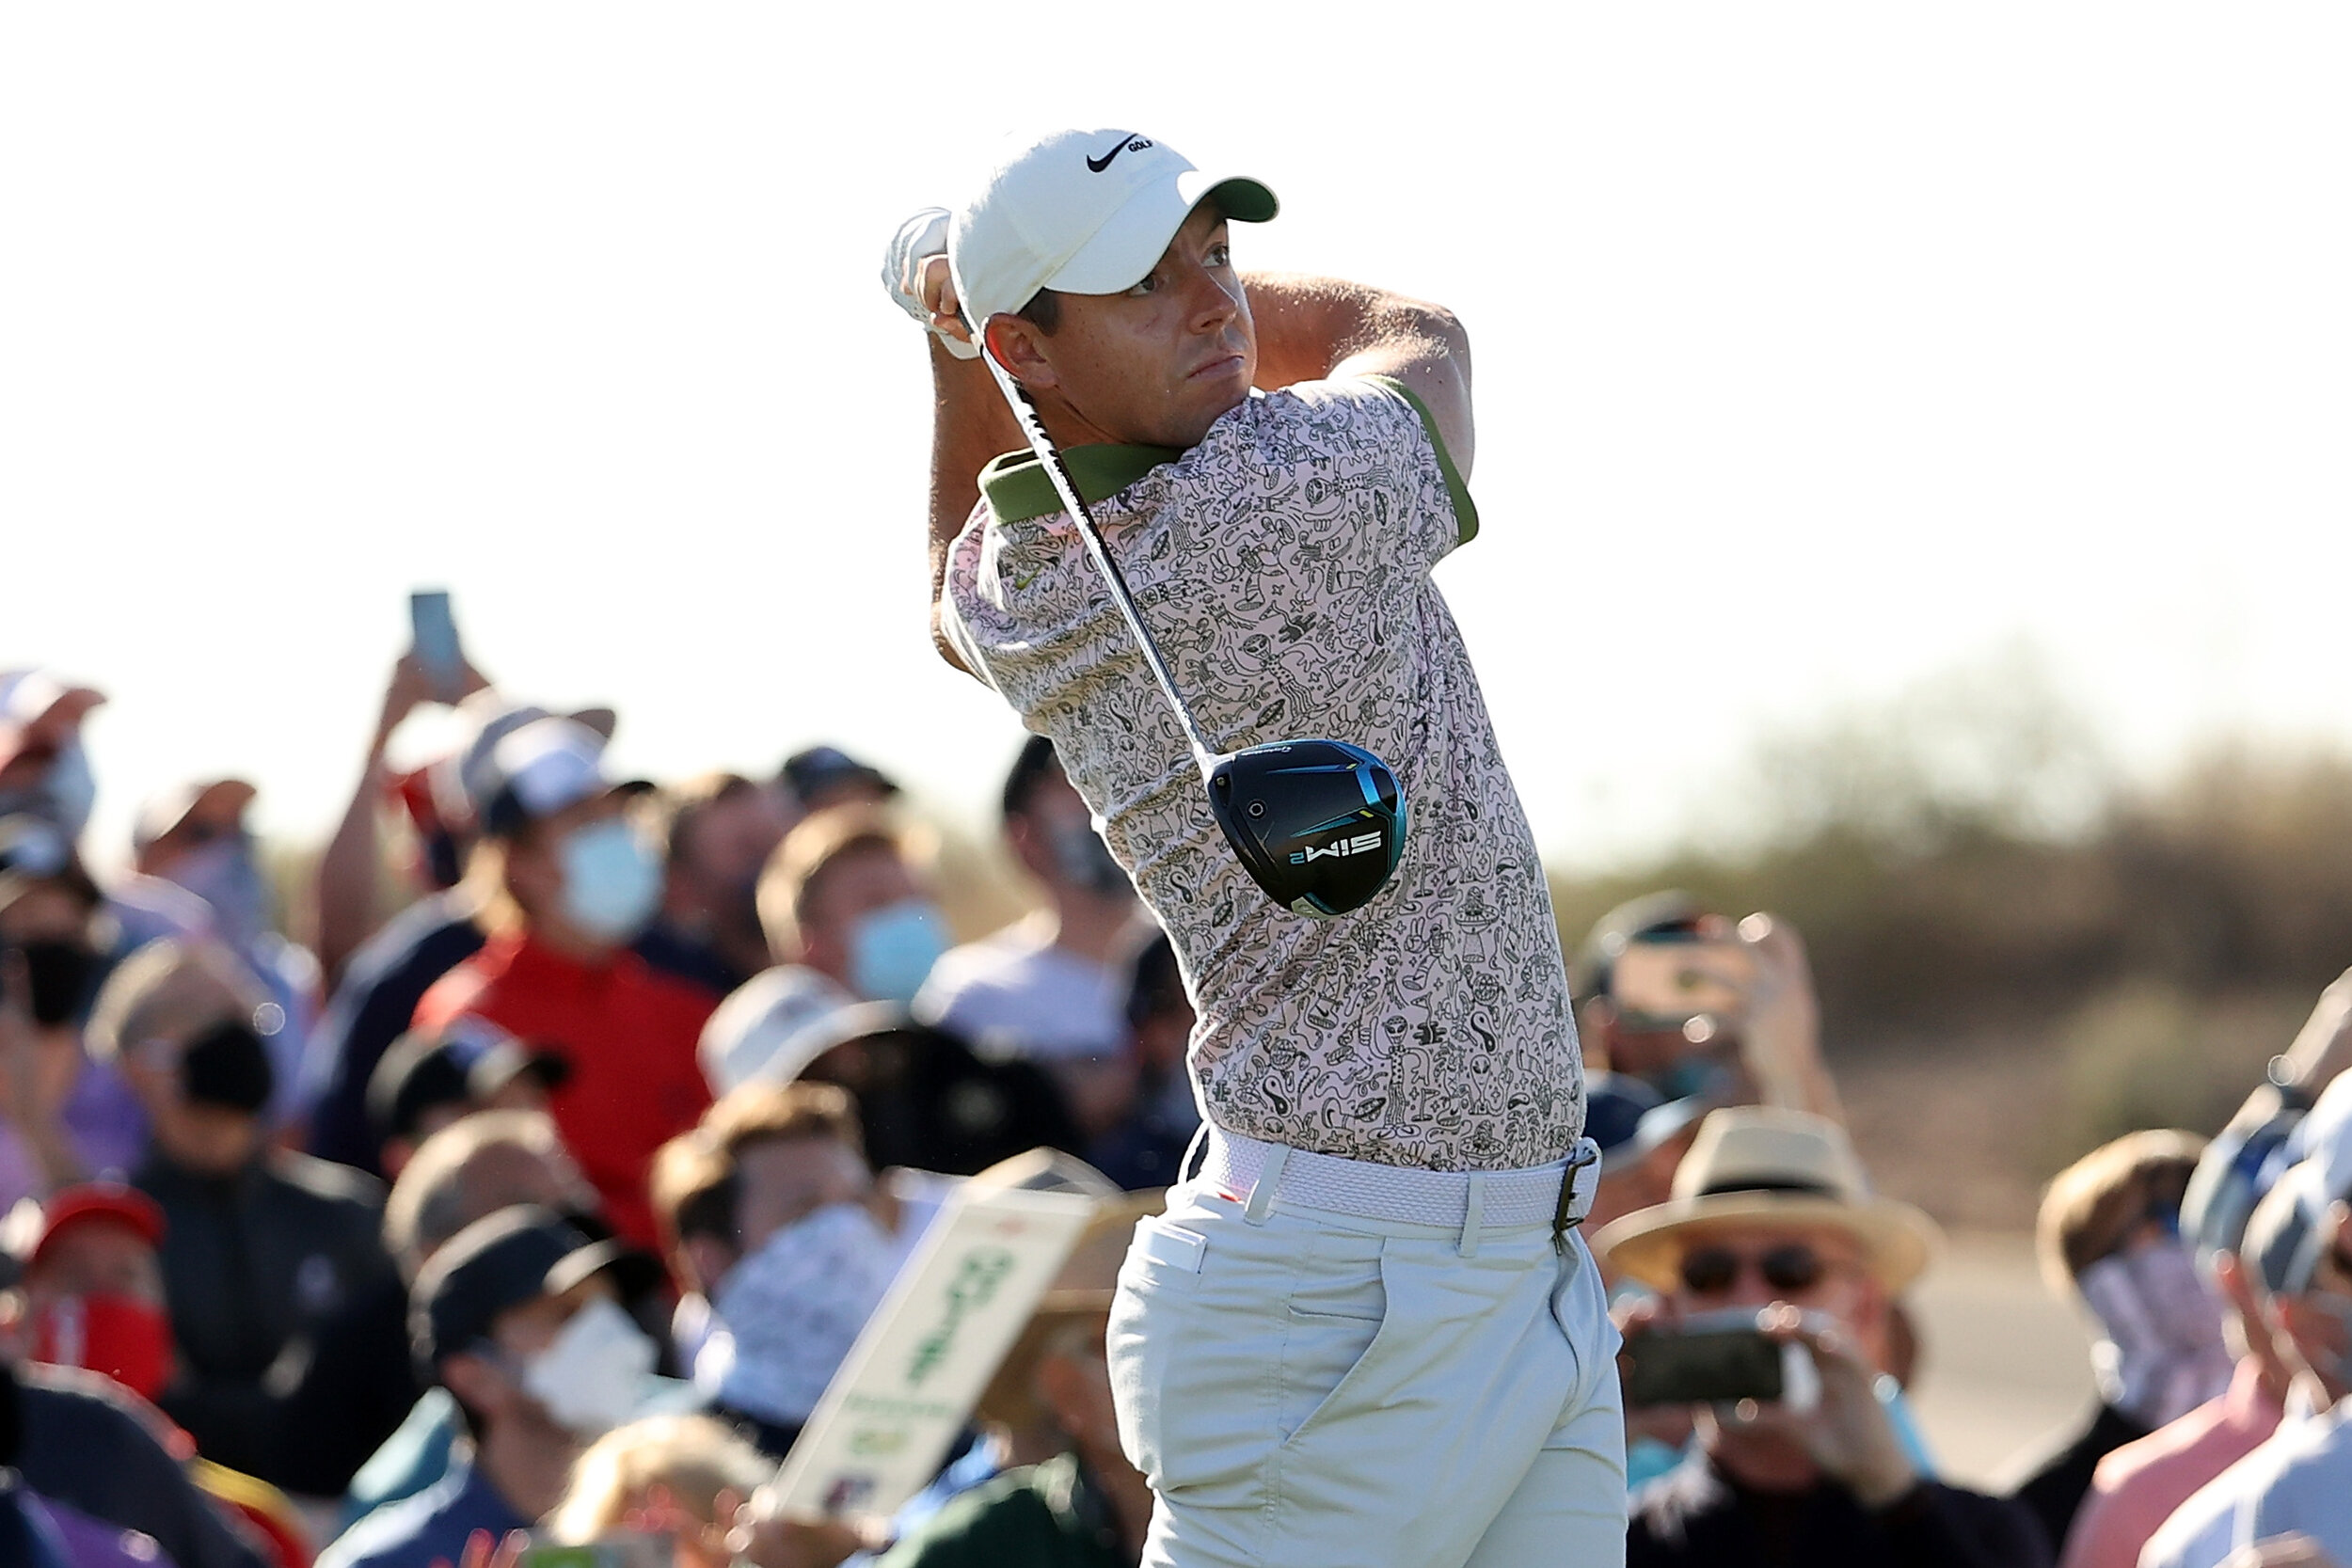  SCOTTSDALE, ARIZONA - FEBRUARY 07: Rory McIlroy of Northern Ireland hits his tee shot on the 11th hole during the final round of the Waste Management Phoenix Open at TPC Scottsdale on February 07, 2021 in Scottsdale, Arizona. (Photo by Abbie Parr/Ge